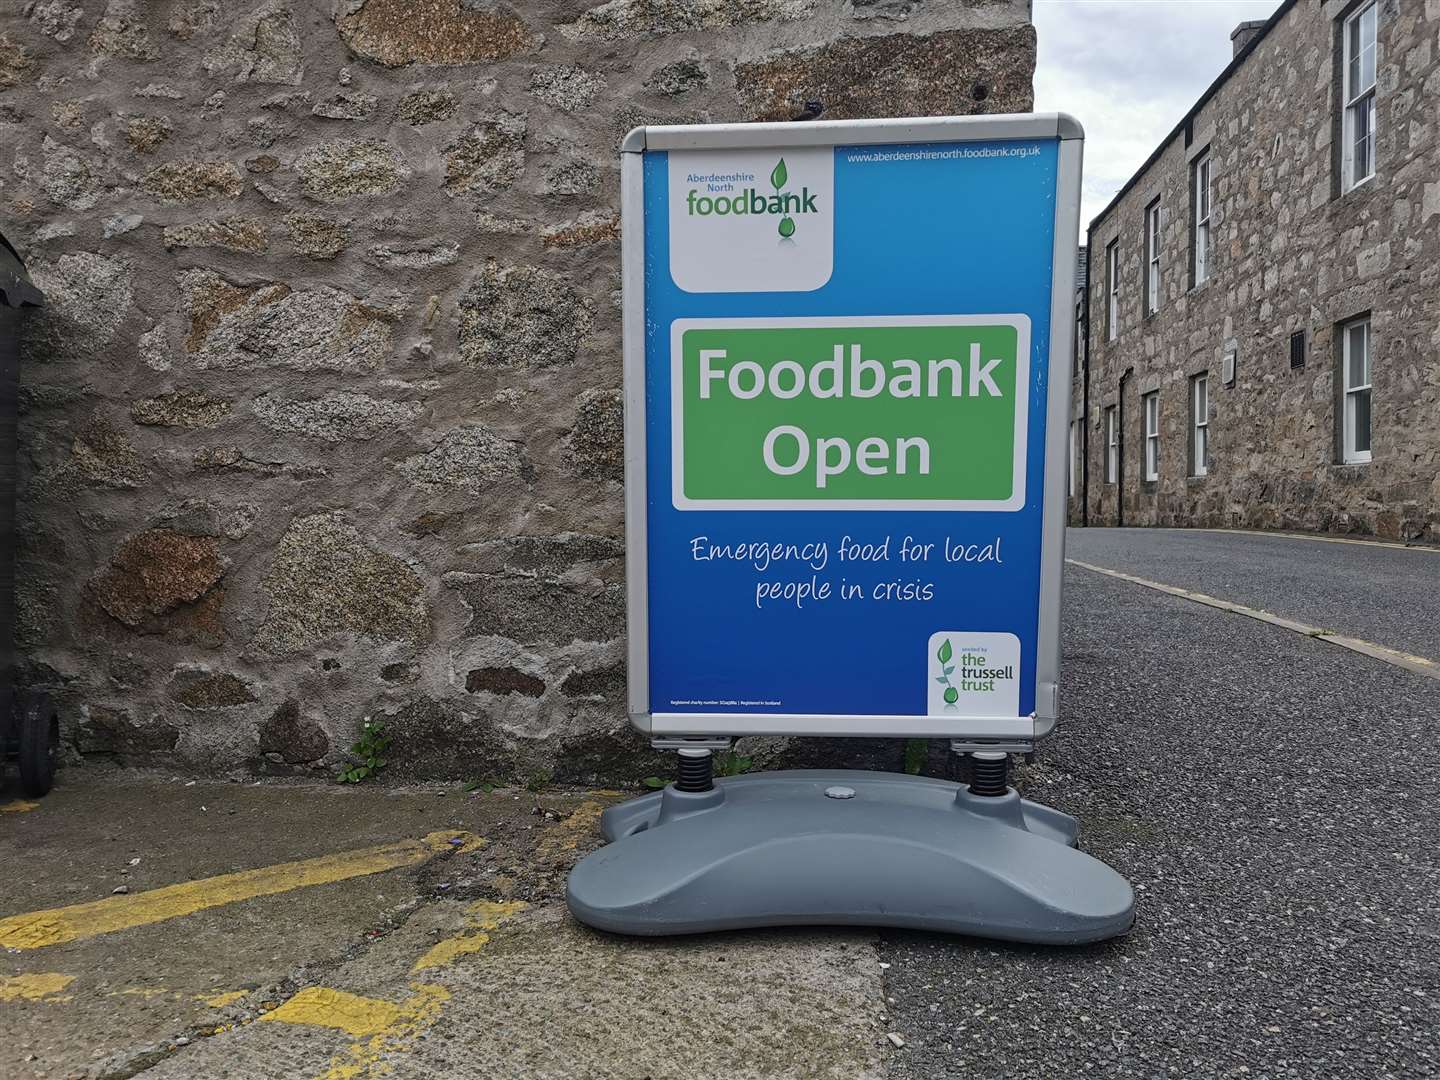 The plan aims to make food banks a thing of the past.